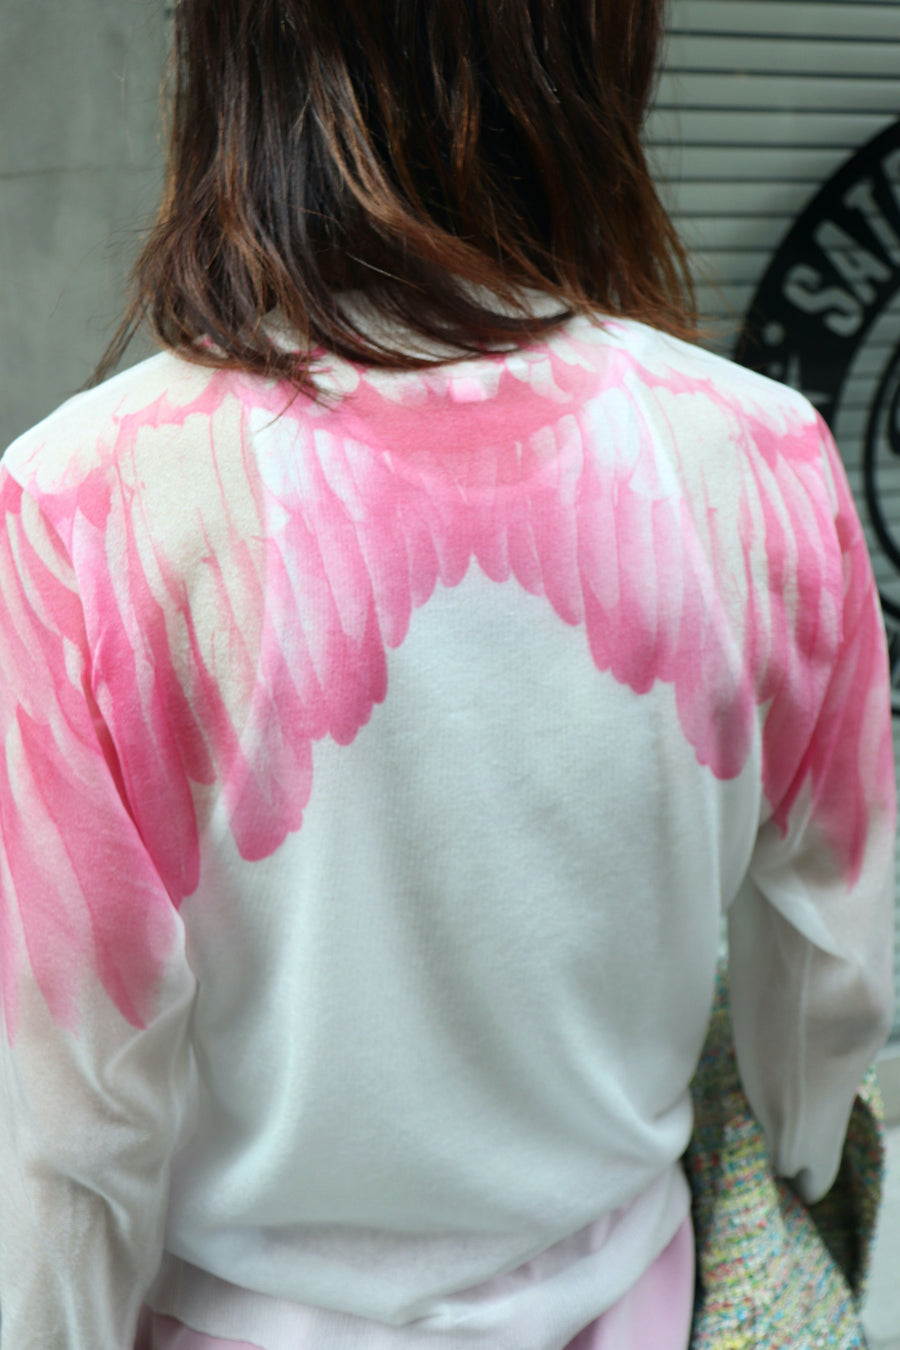 MASU(エムエーエスユー)のCLEAR ANGEL WING SWEATER CLEAR WHITEの通販 